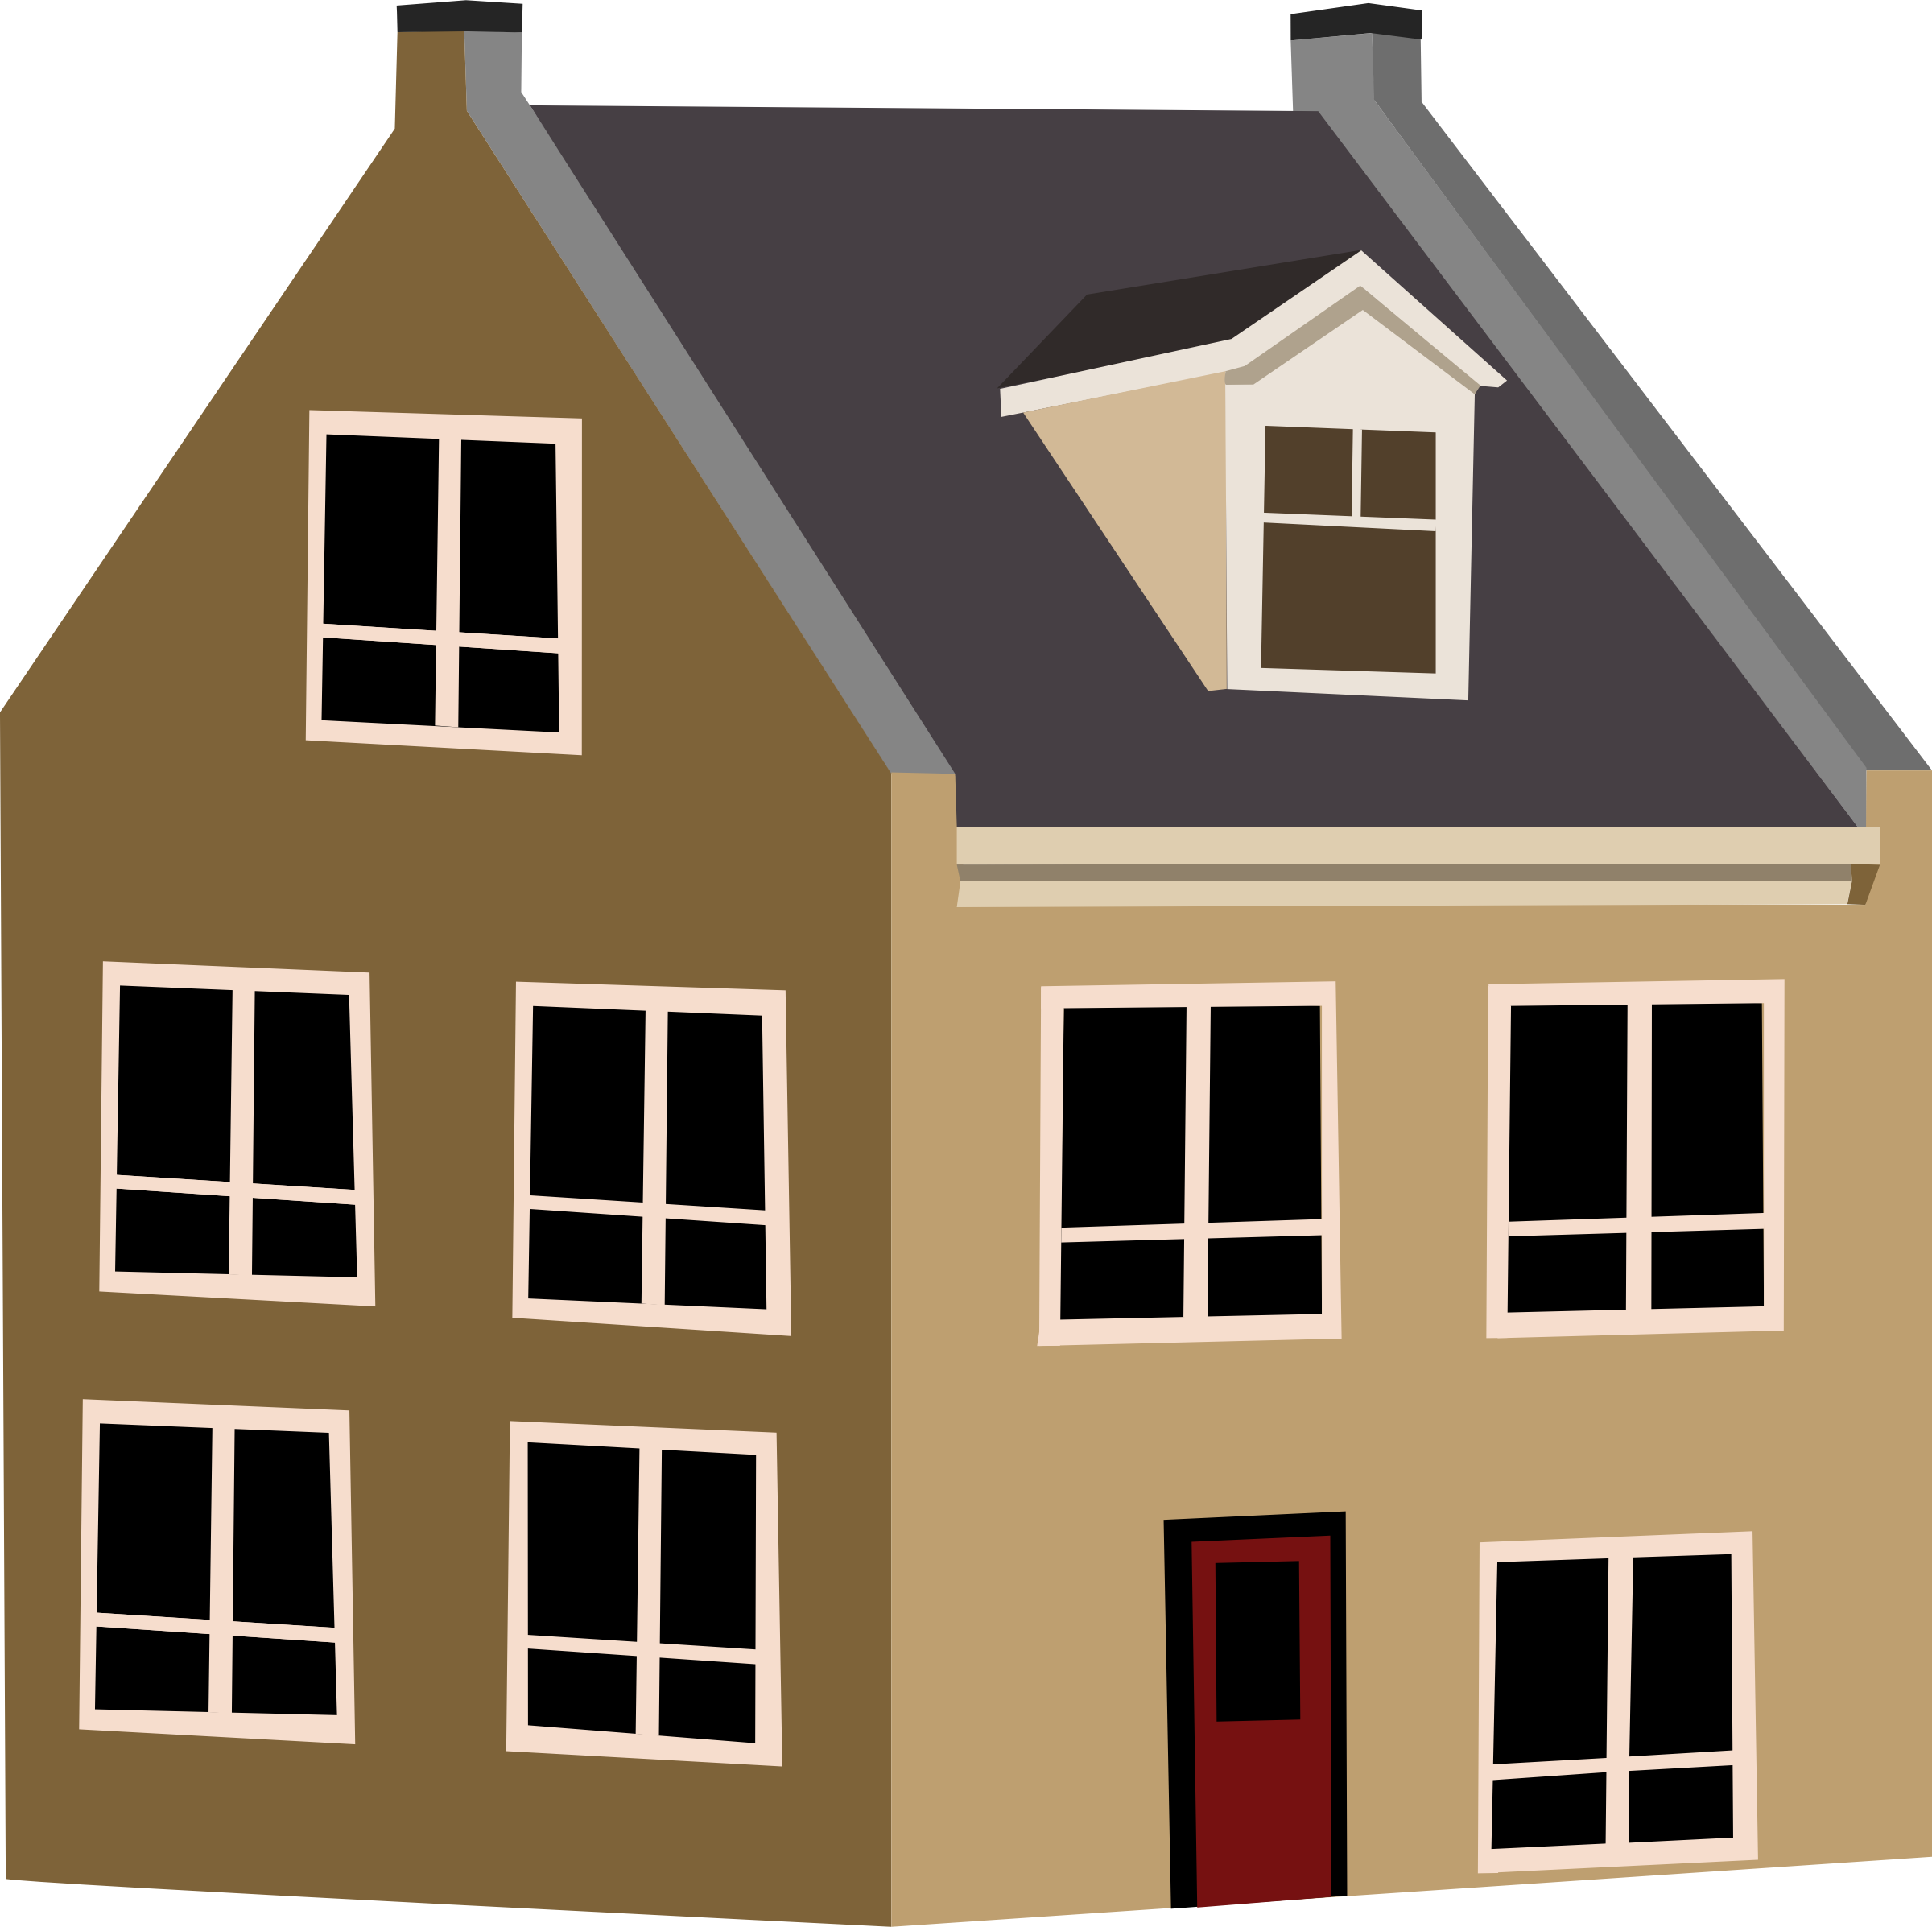 Big and small house clipart